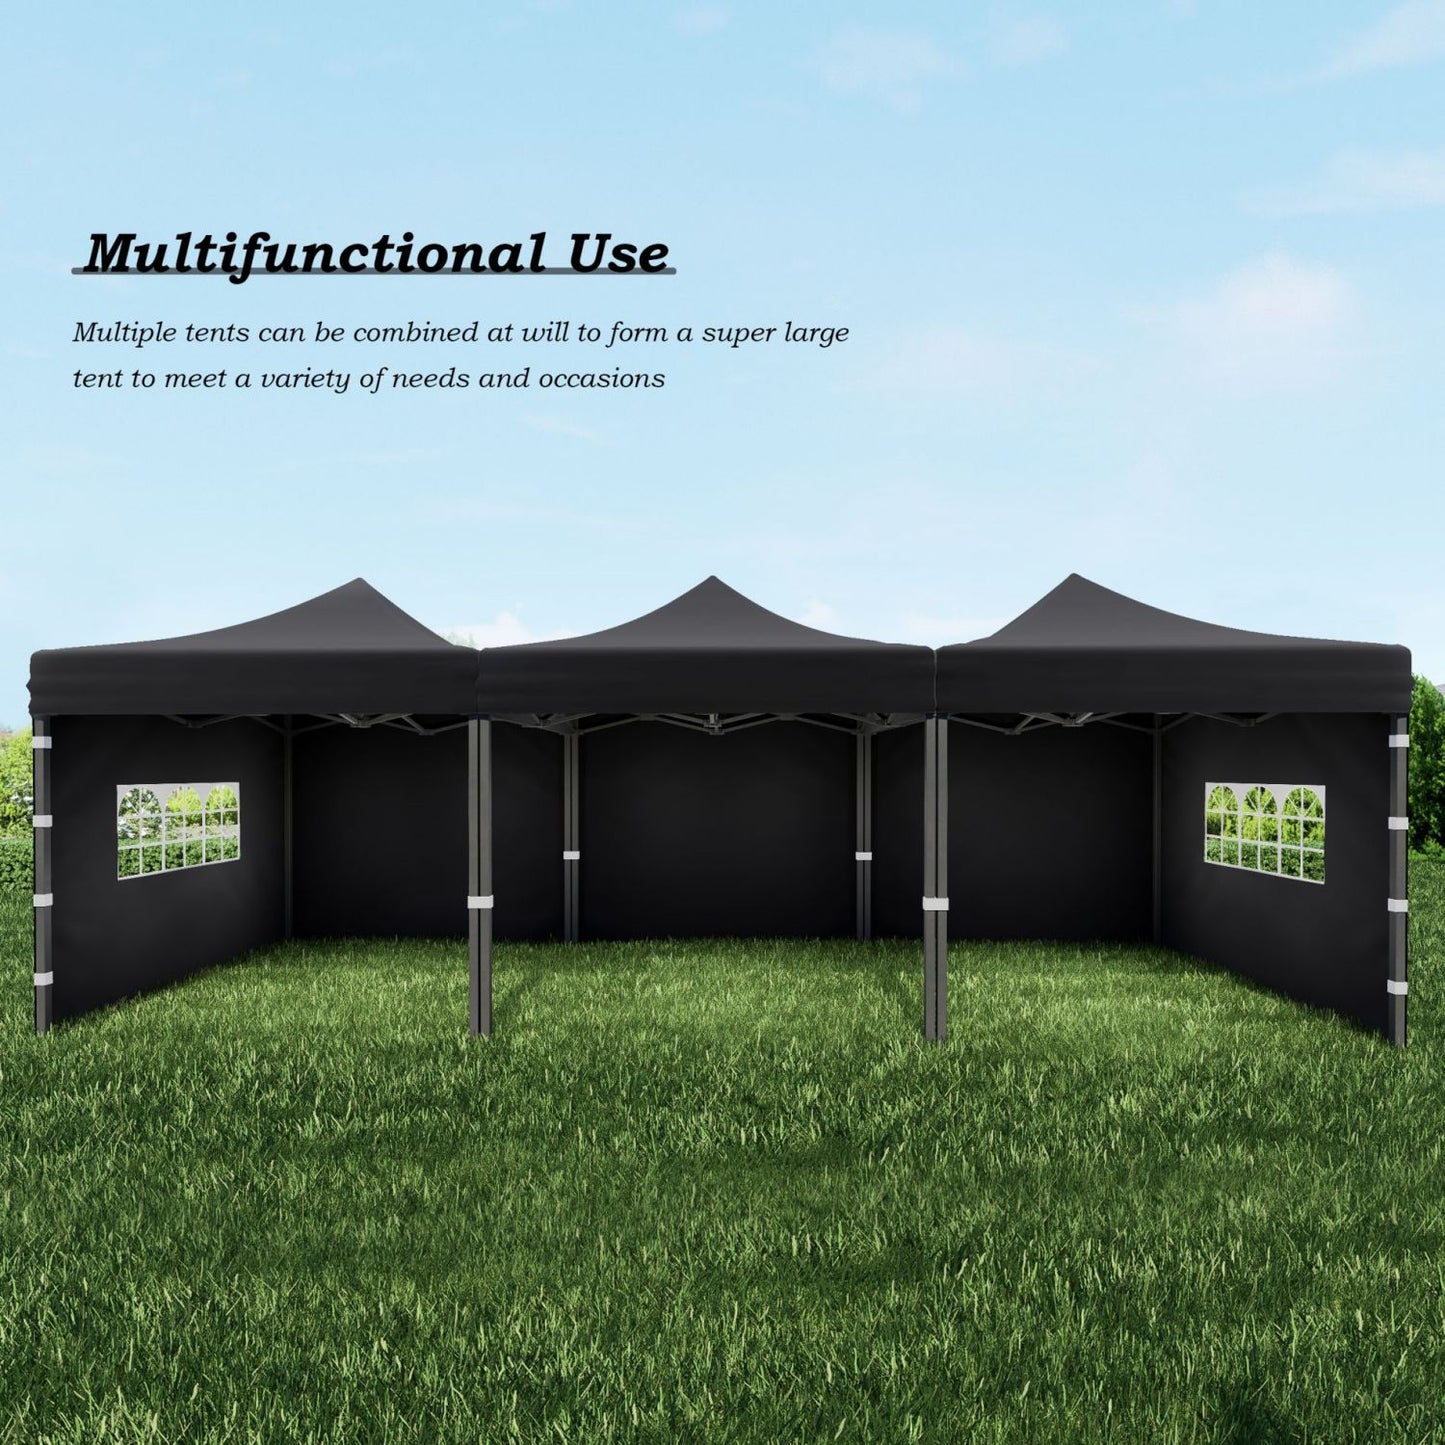 10 x 10 FT. Pop Up Canopy Tent with Windows Sidewalls, 3 Adjustable Heights, with Wheeled Bag  Aoodor    